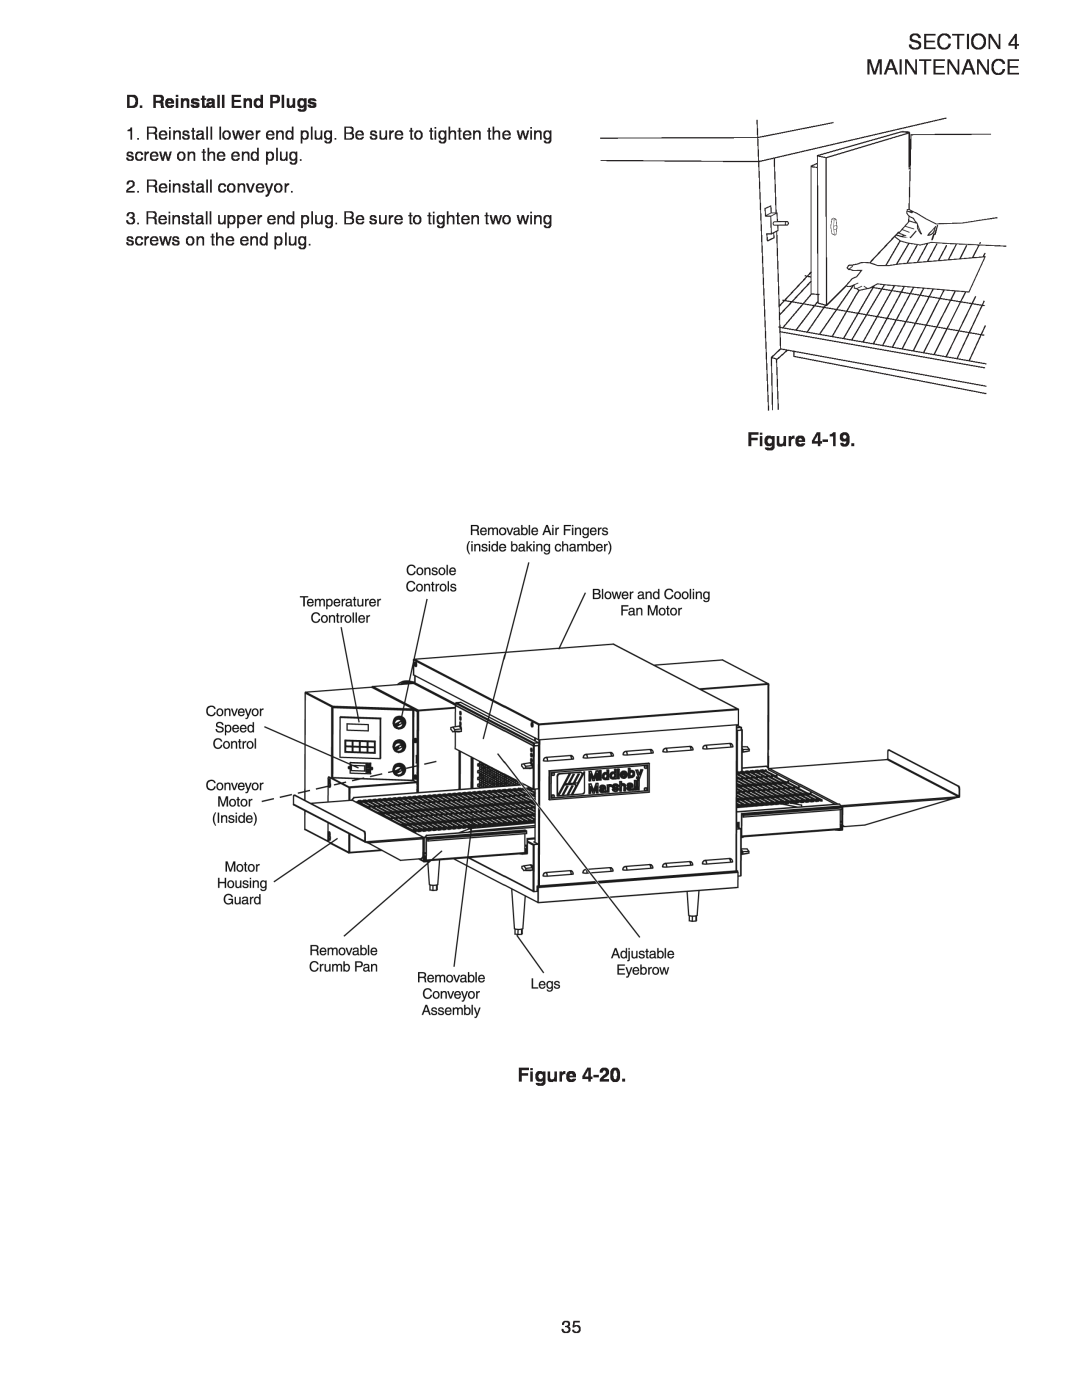 Middleby Marshall PS528G installation manual Section Maintenance, Figure Figure, D. Reinstall End Plugs, Reinstall conveyor 